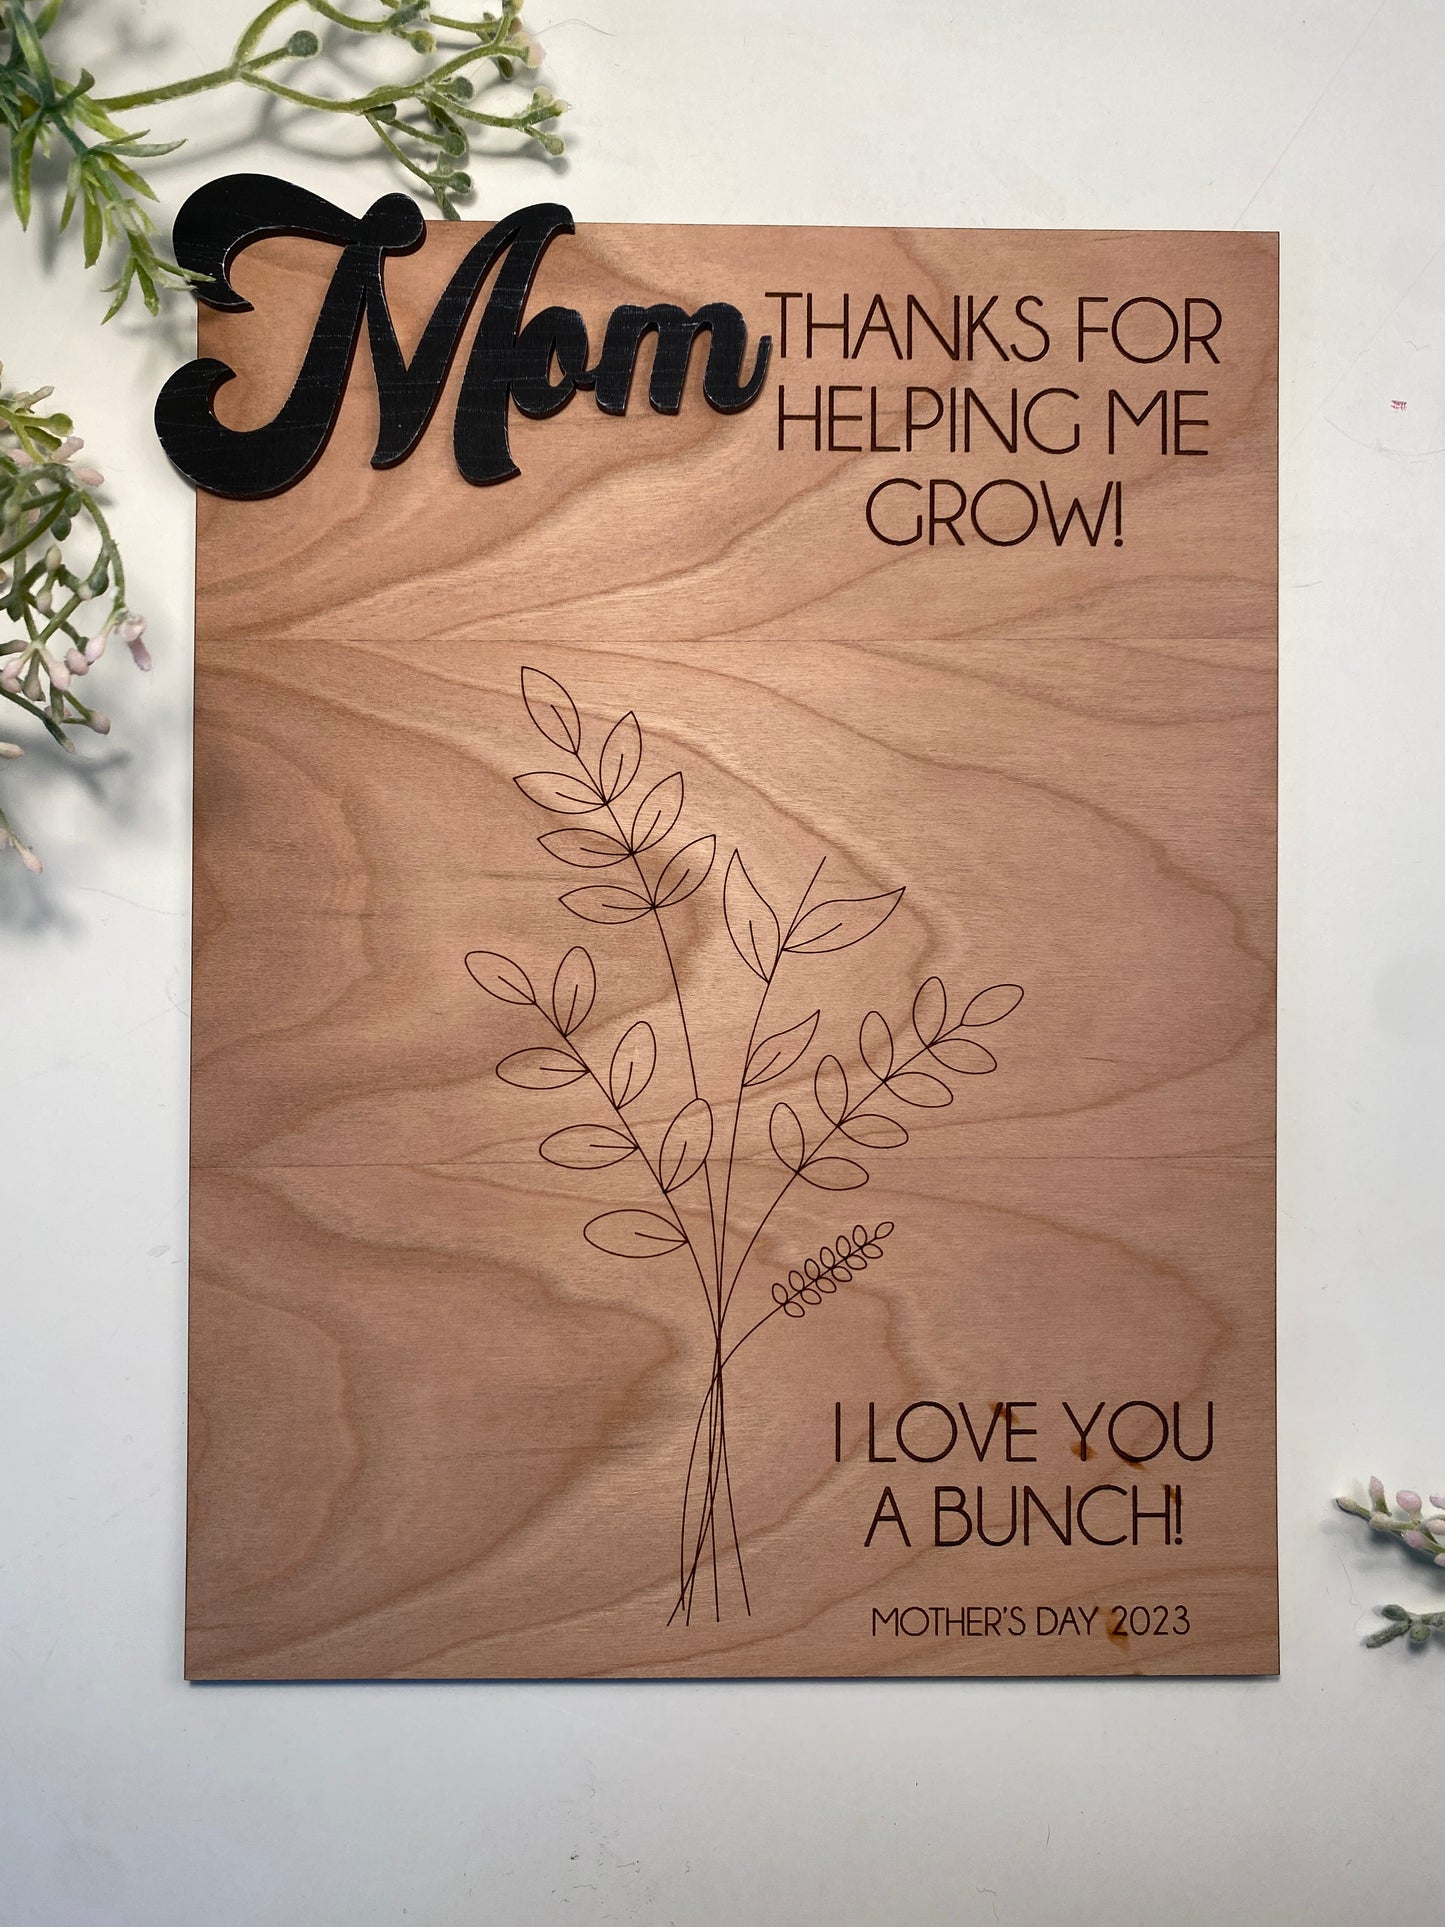 Mother's Day Handprints